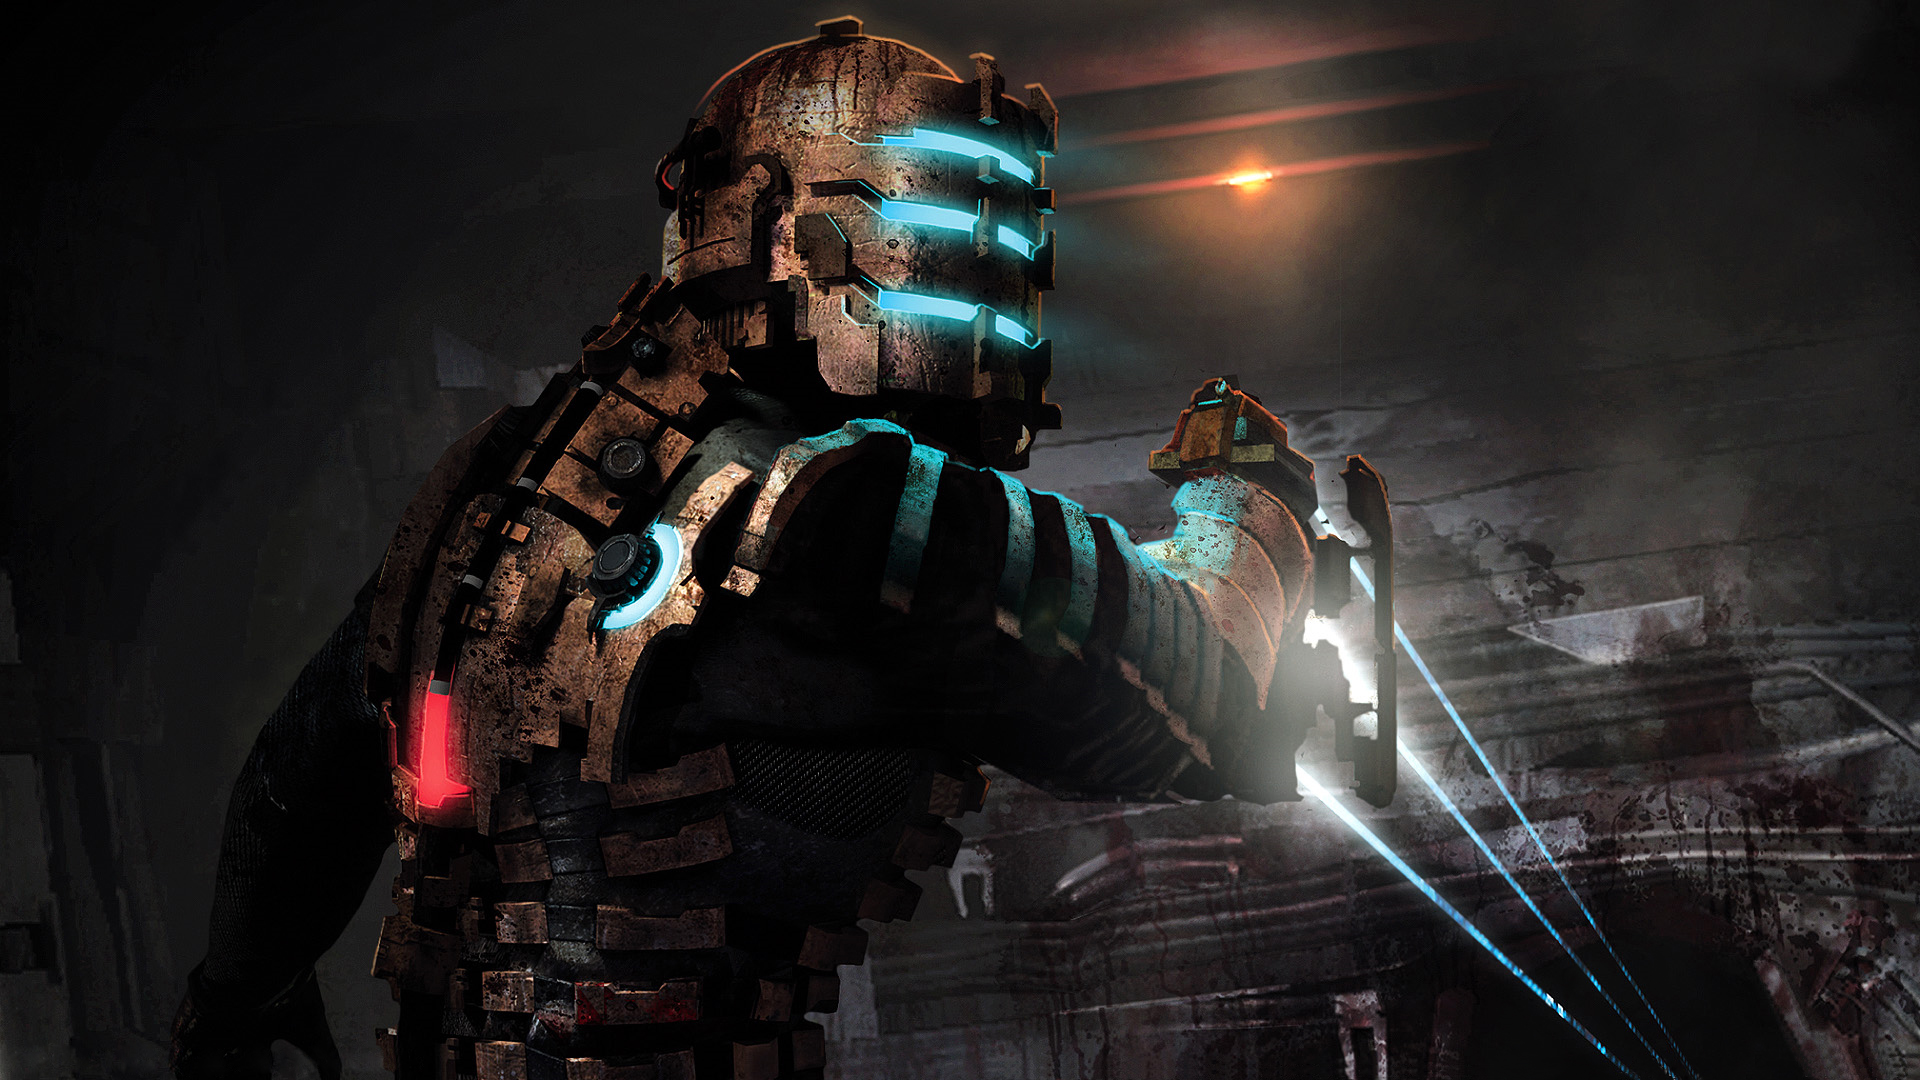 Review: Dead Space - In Space, There's A Lot Of Screaming